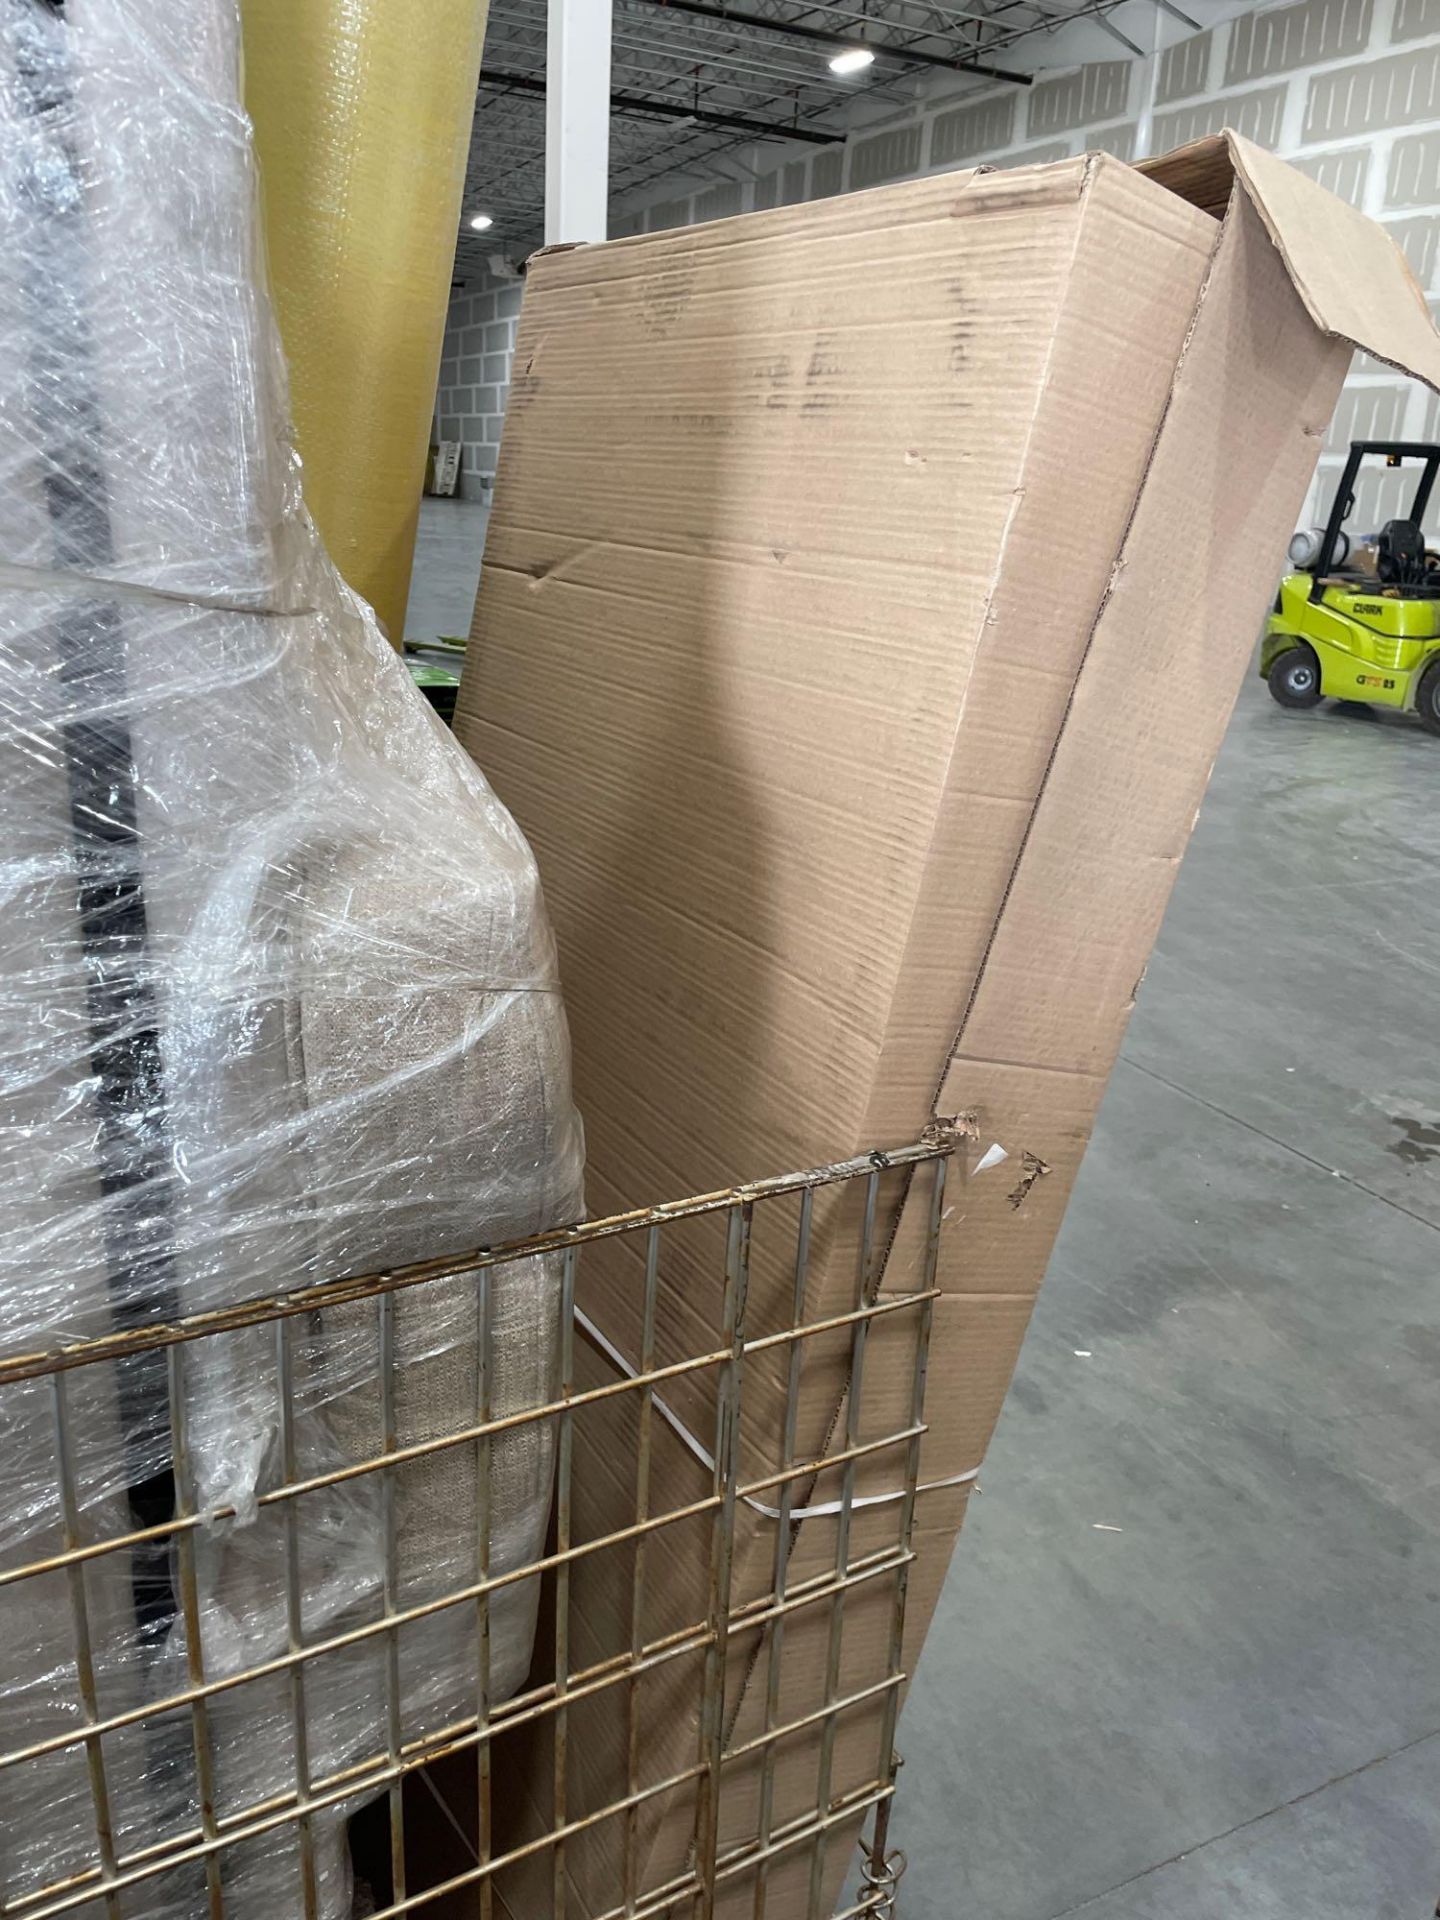 Two Pallets - Image 14 of 17